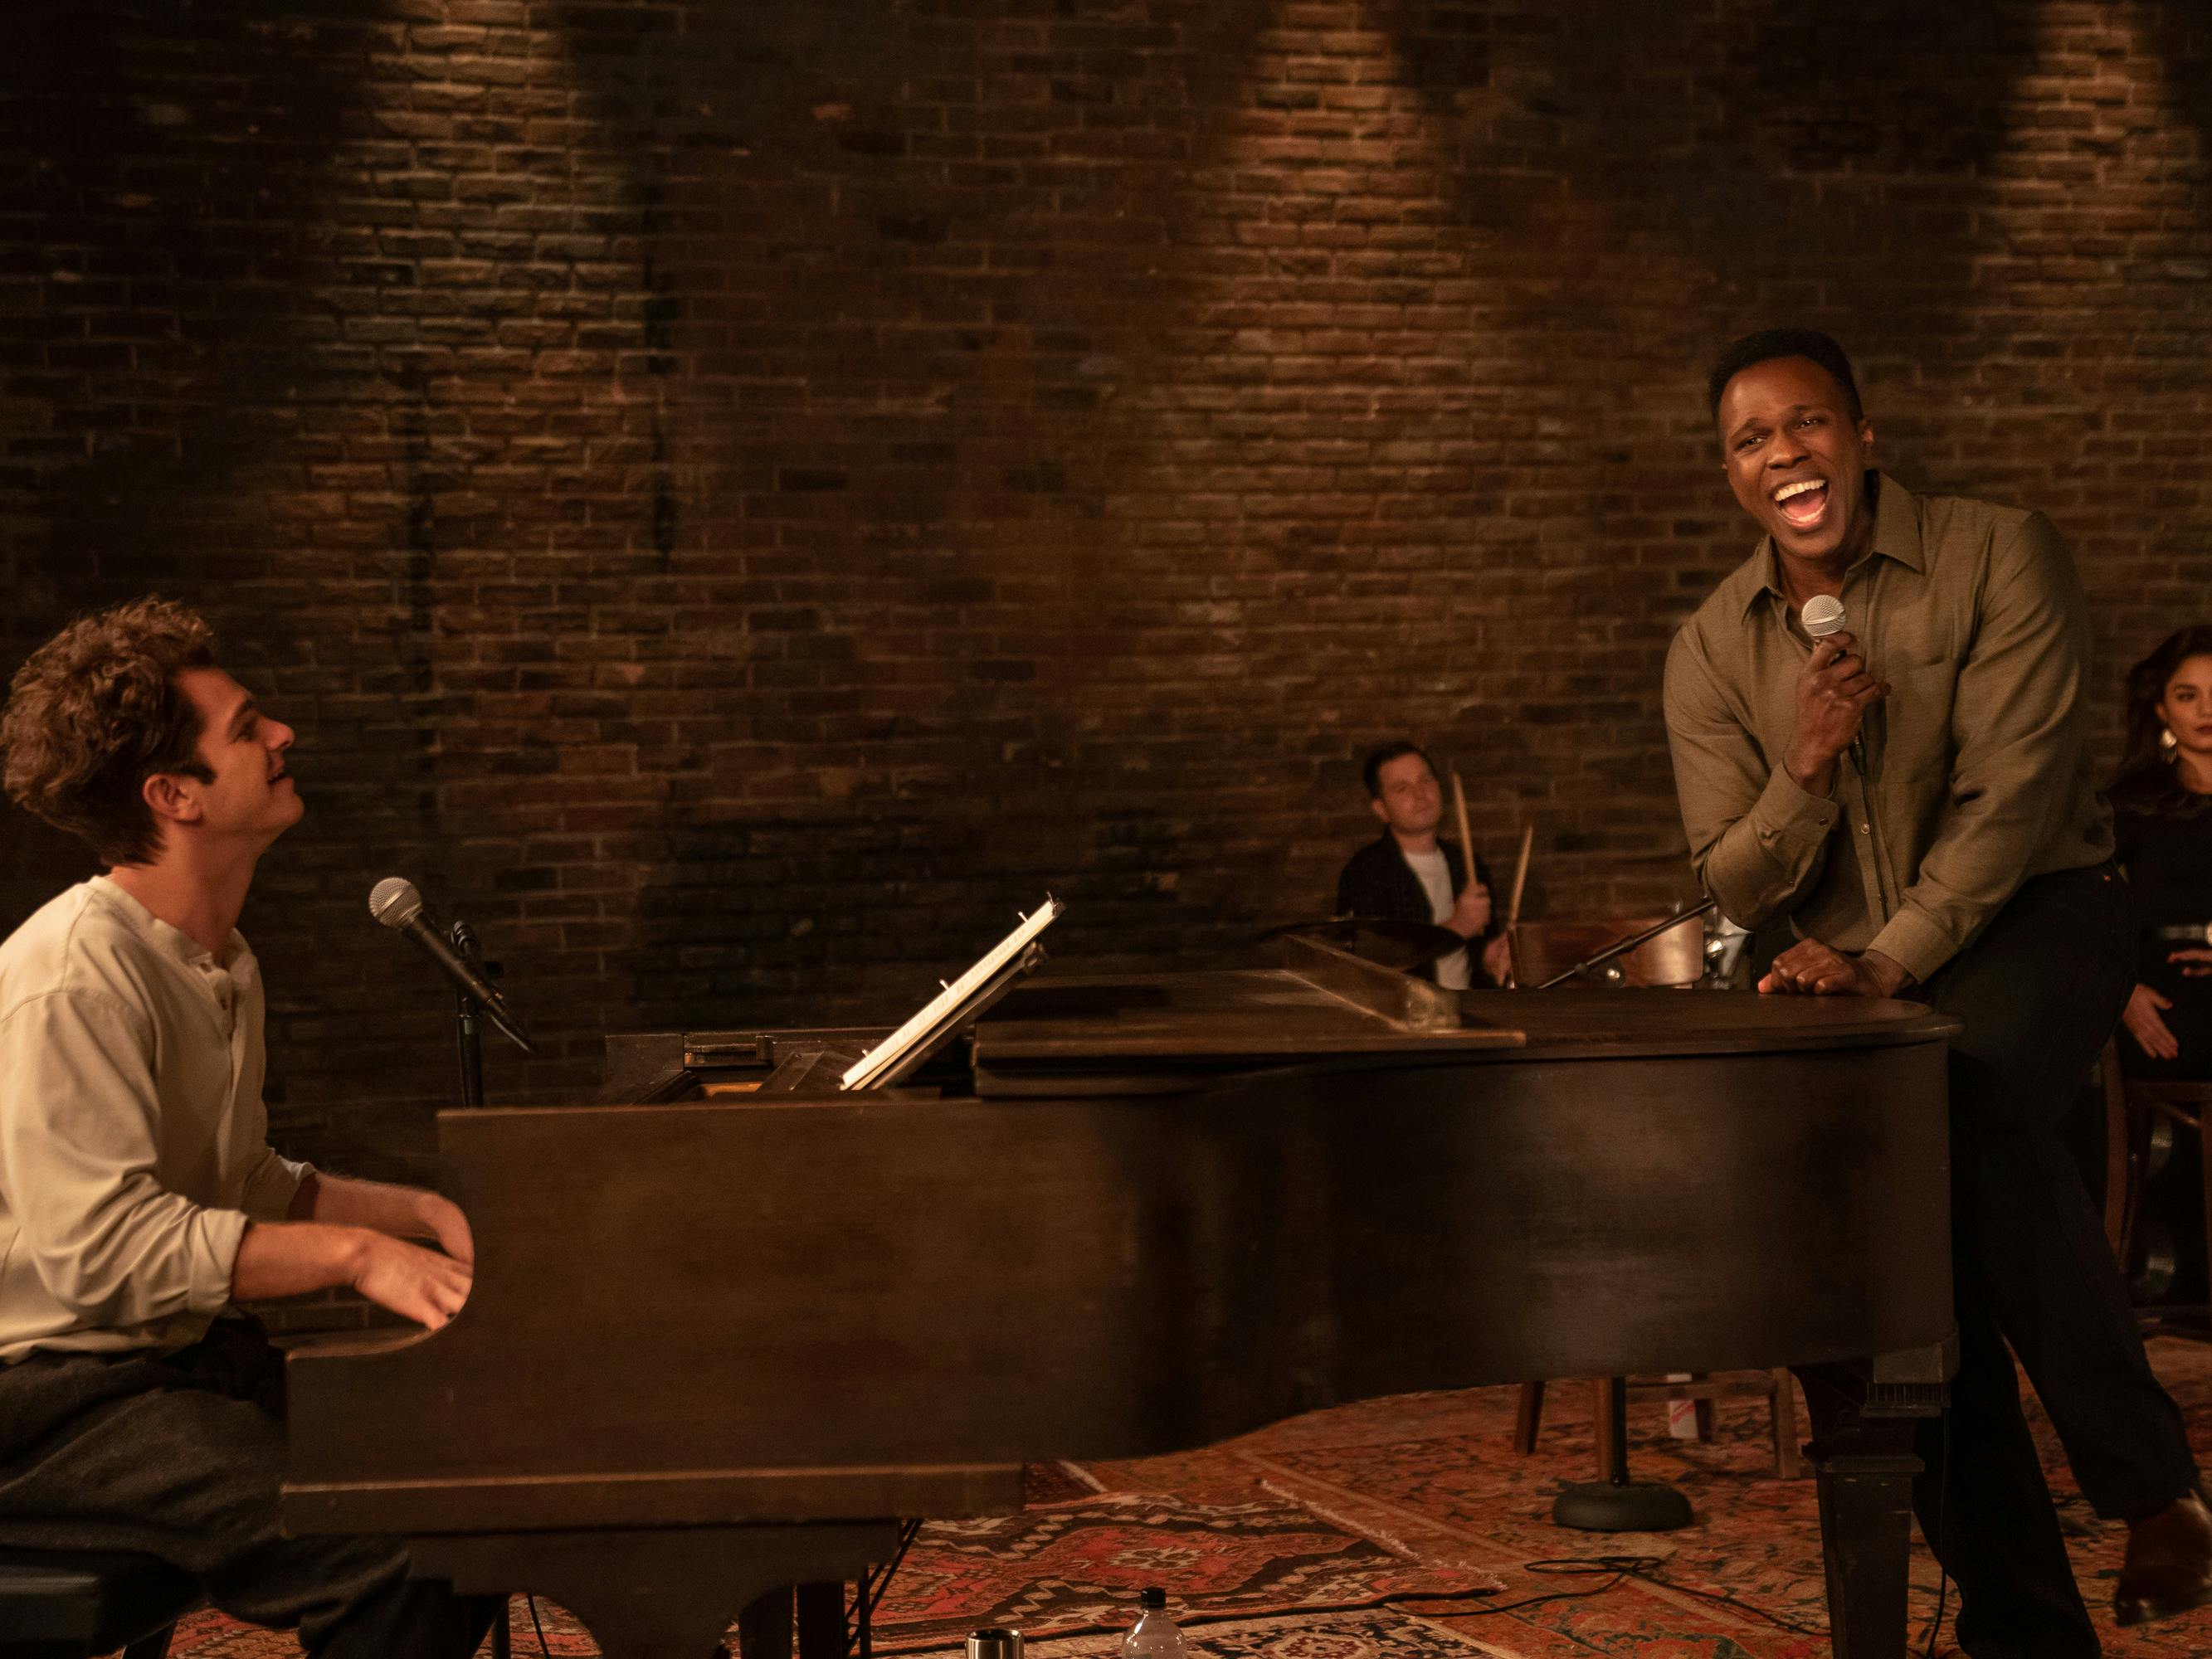 Andrew Garfield and Joshua Henry sing together around a piano into microphones. Behind them are the rest of the chorus and a brick wall.